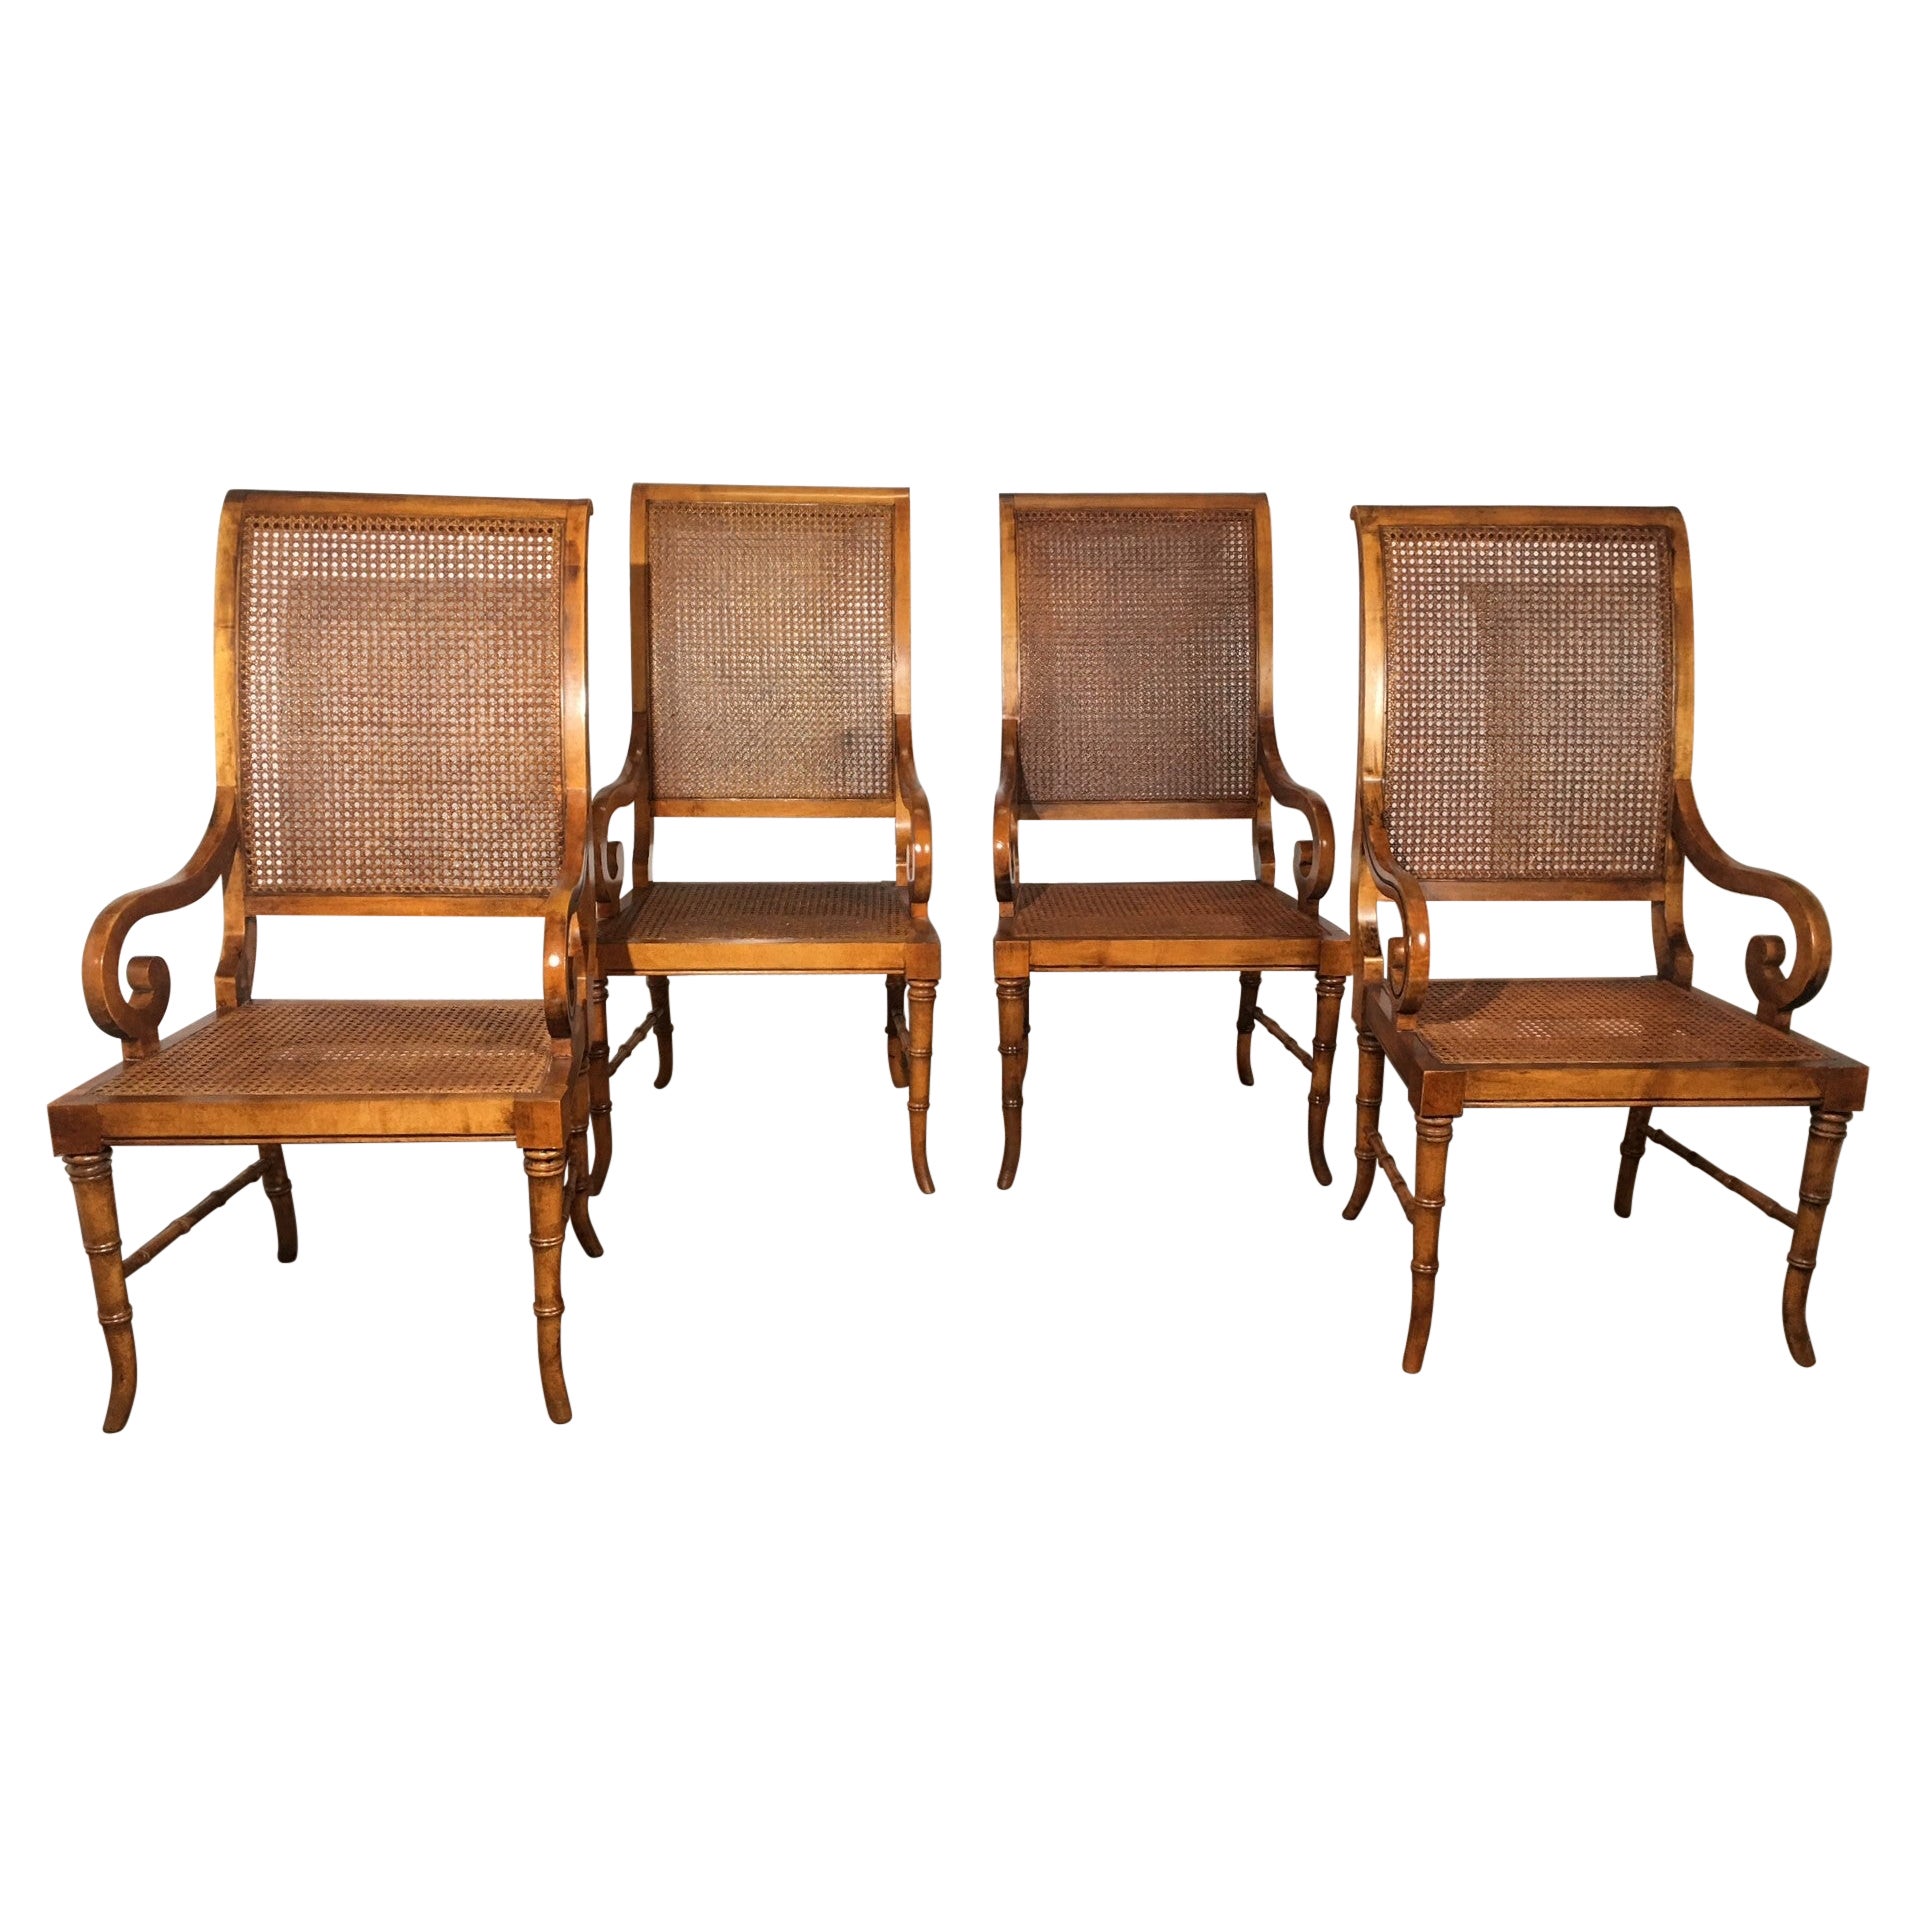 Set of 4 Cane Dining Chairs